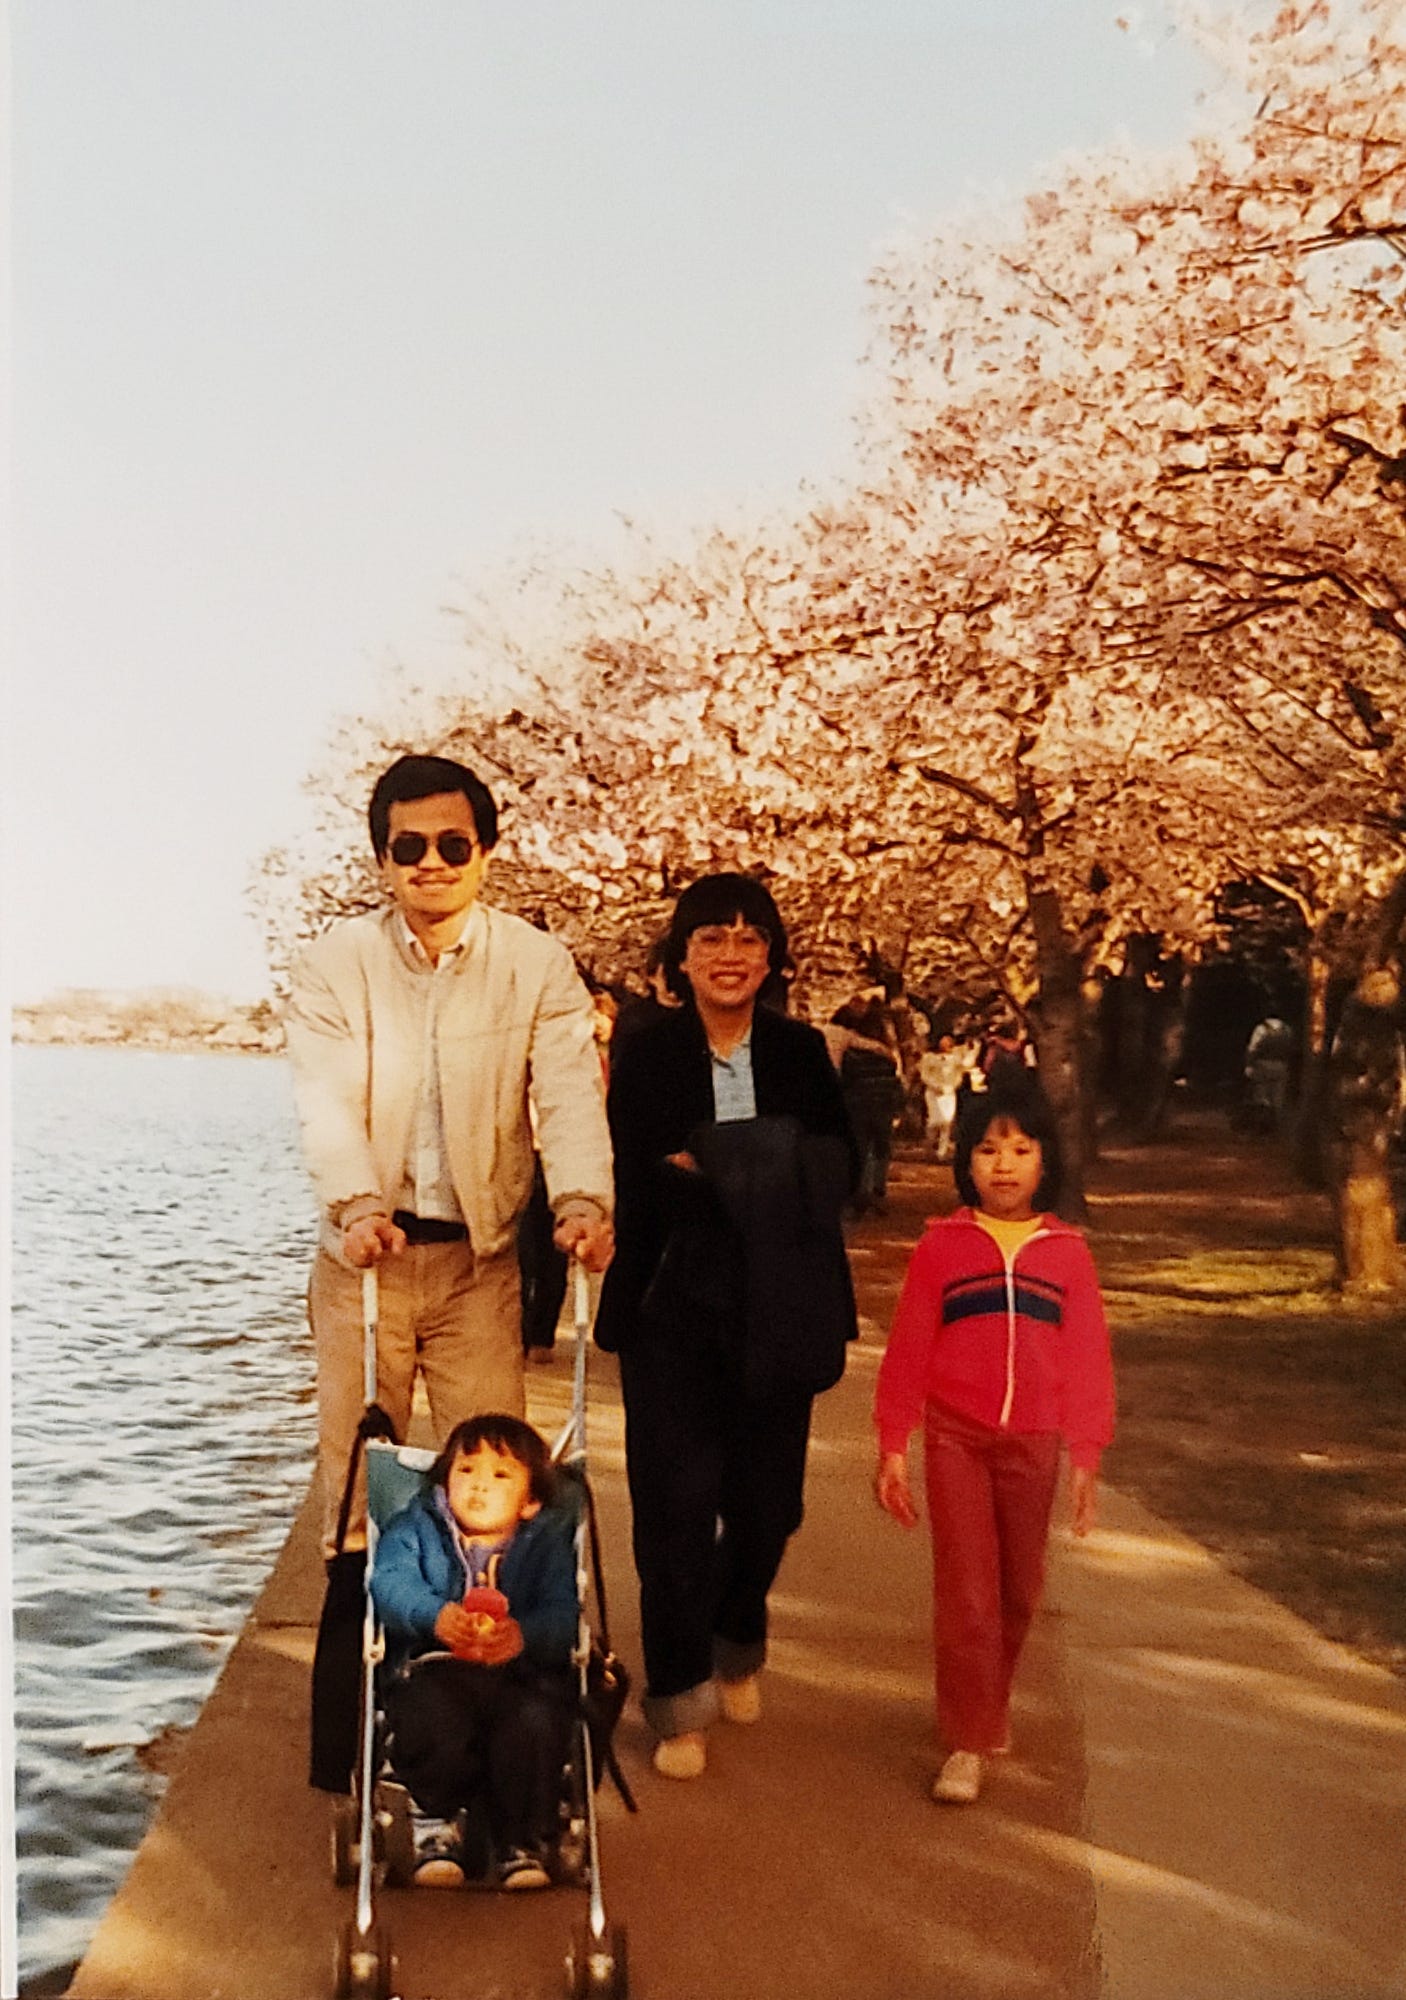 My father, mother, second of my two sisters, and brother walking with cherry blossoms behind them.